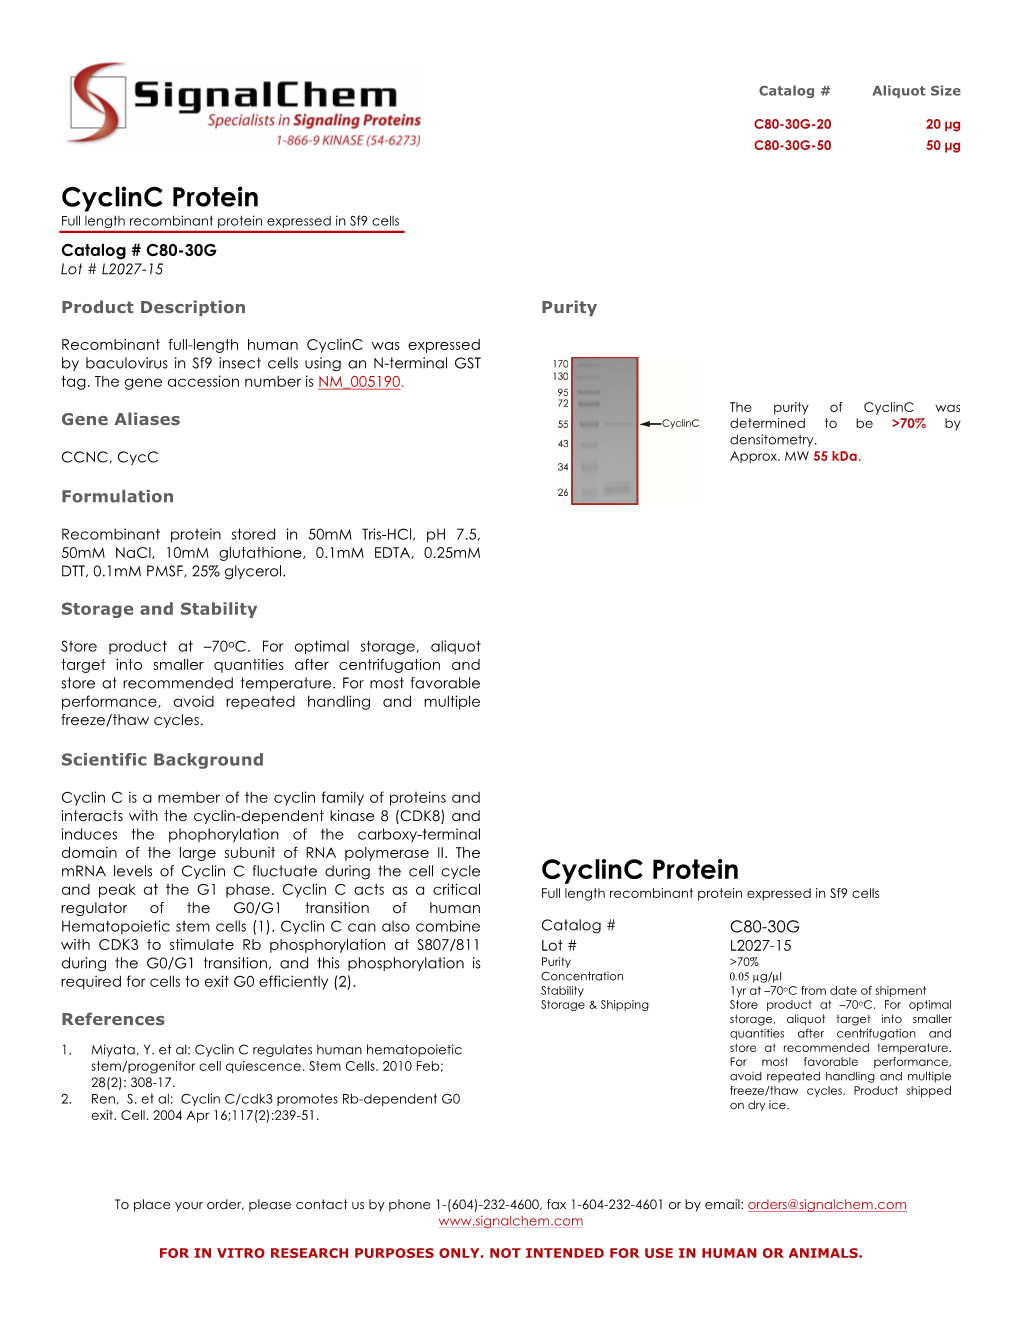 Cyclinc Protein Full Length Recombinant Protein Expressed in Sf9 Cells